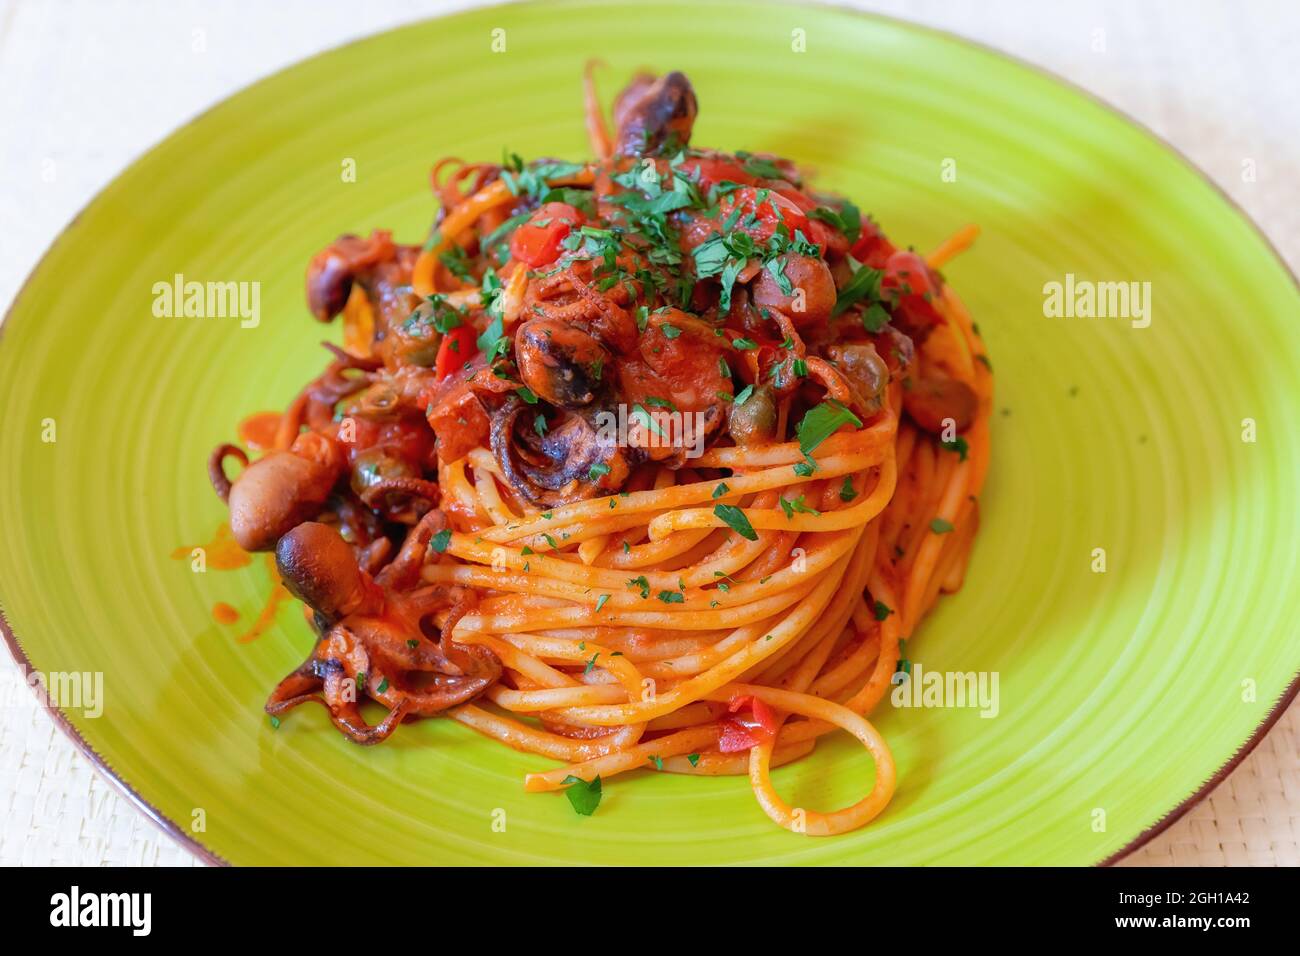 Spaghetti with octopus, tomato sauce, olives and capers. Typical recipe of Neapolitan cuisine, in Italy. Ready to eat. Stock Photo